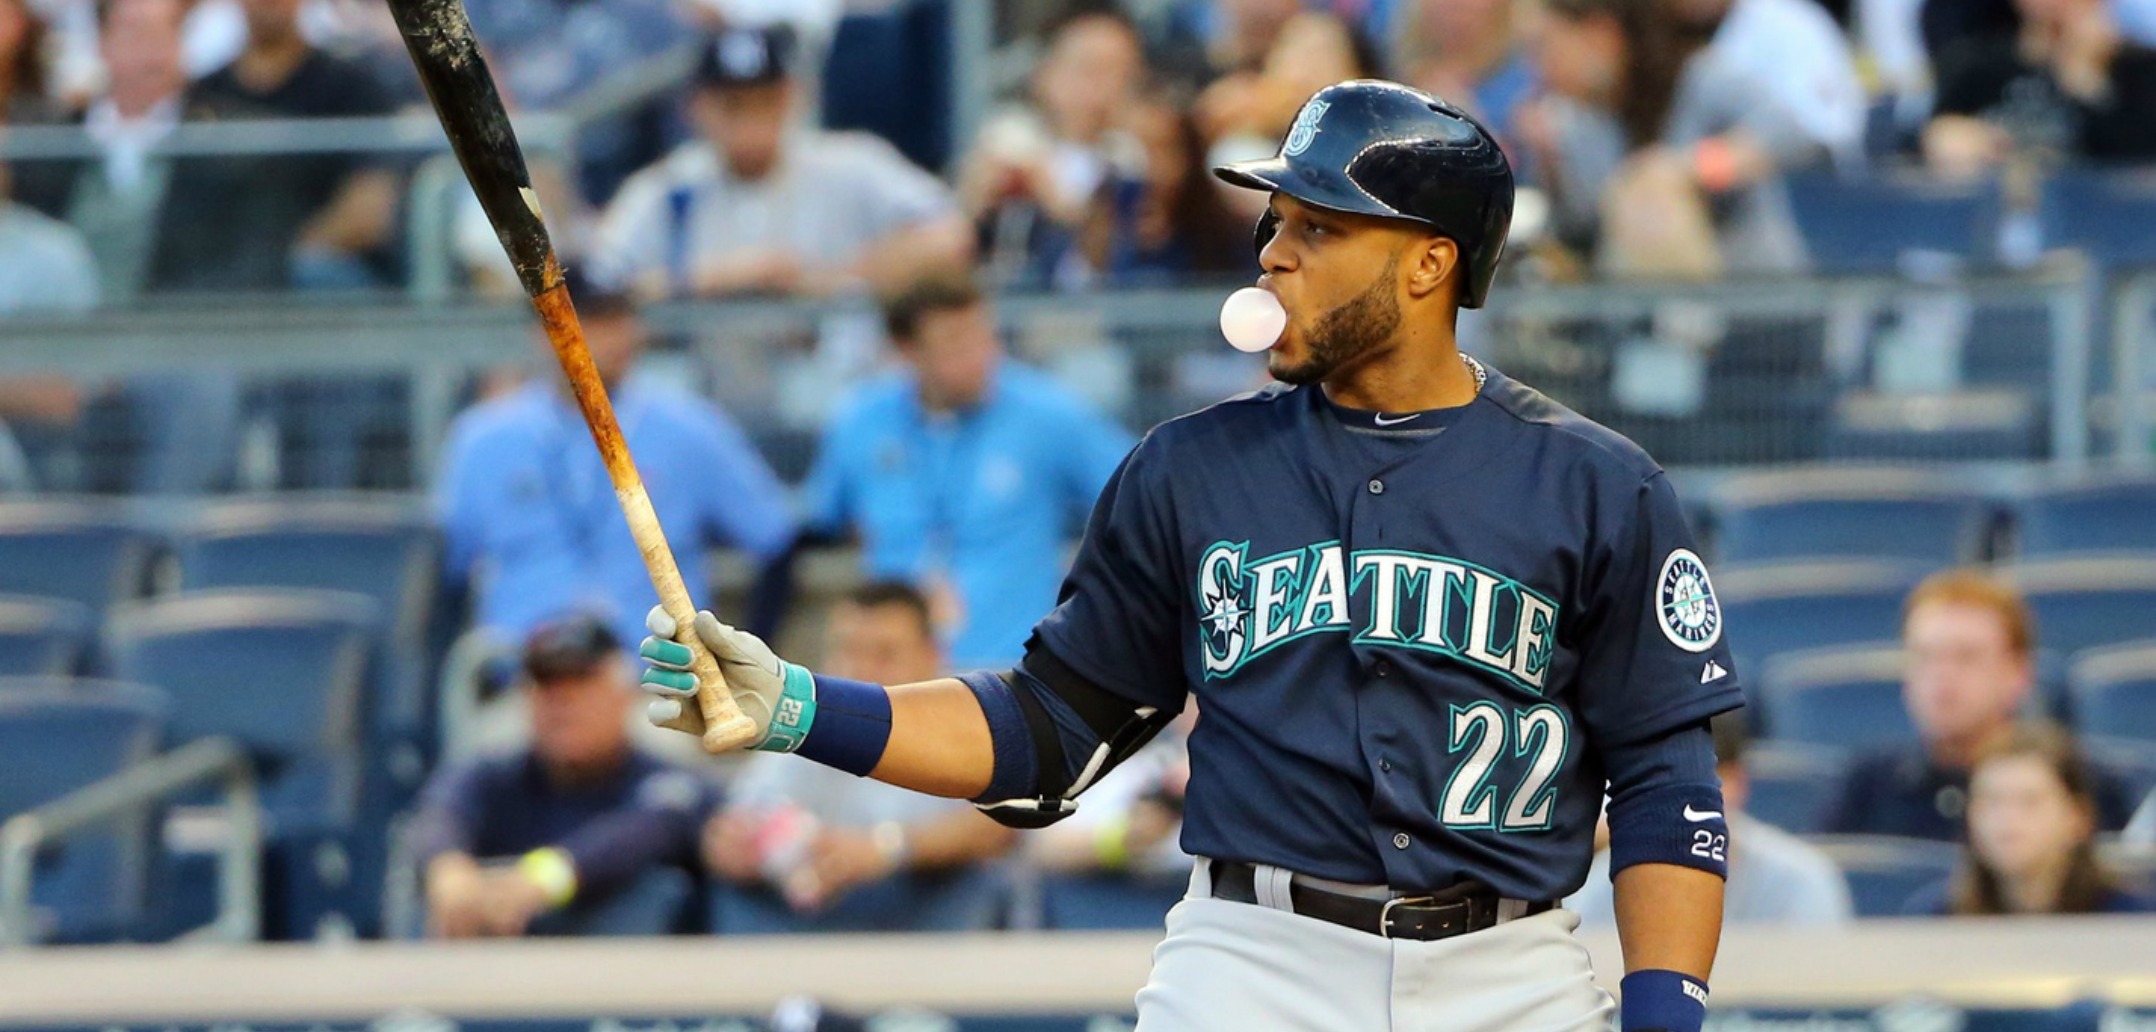 Robinson Cano iPhone Wallpaper Best